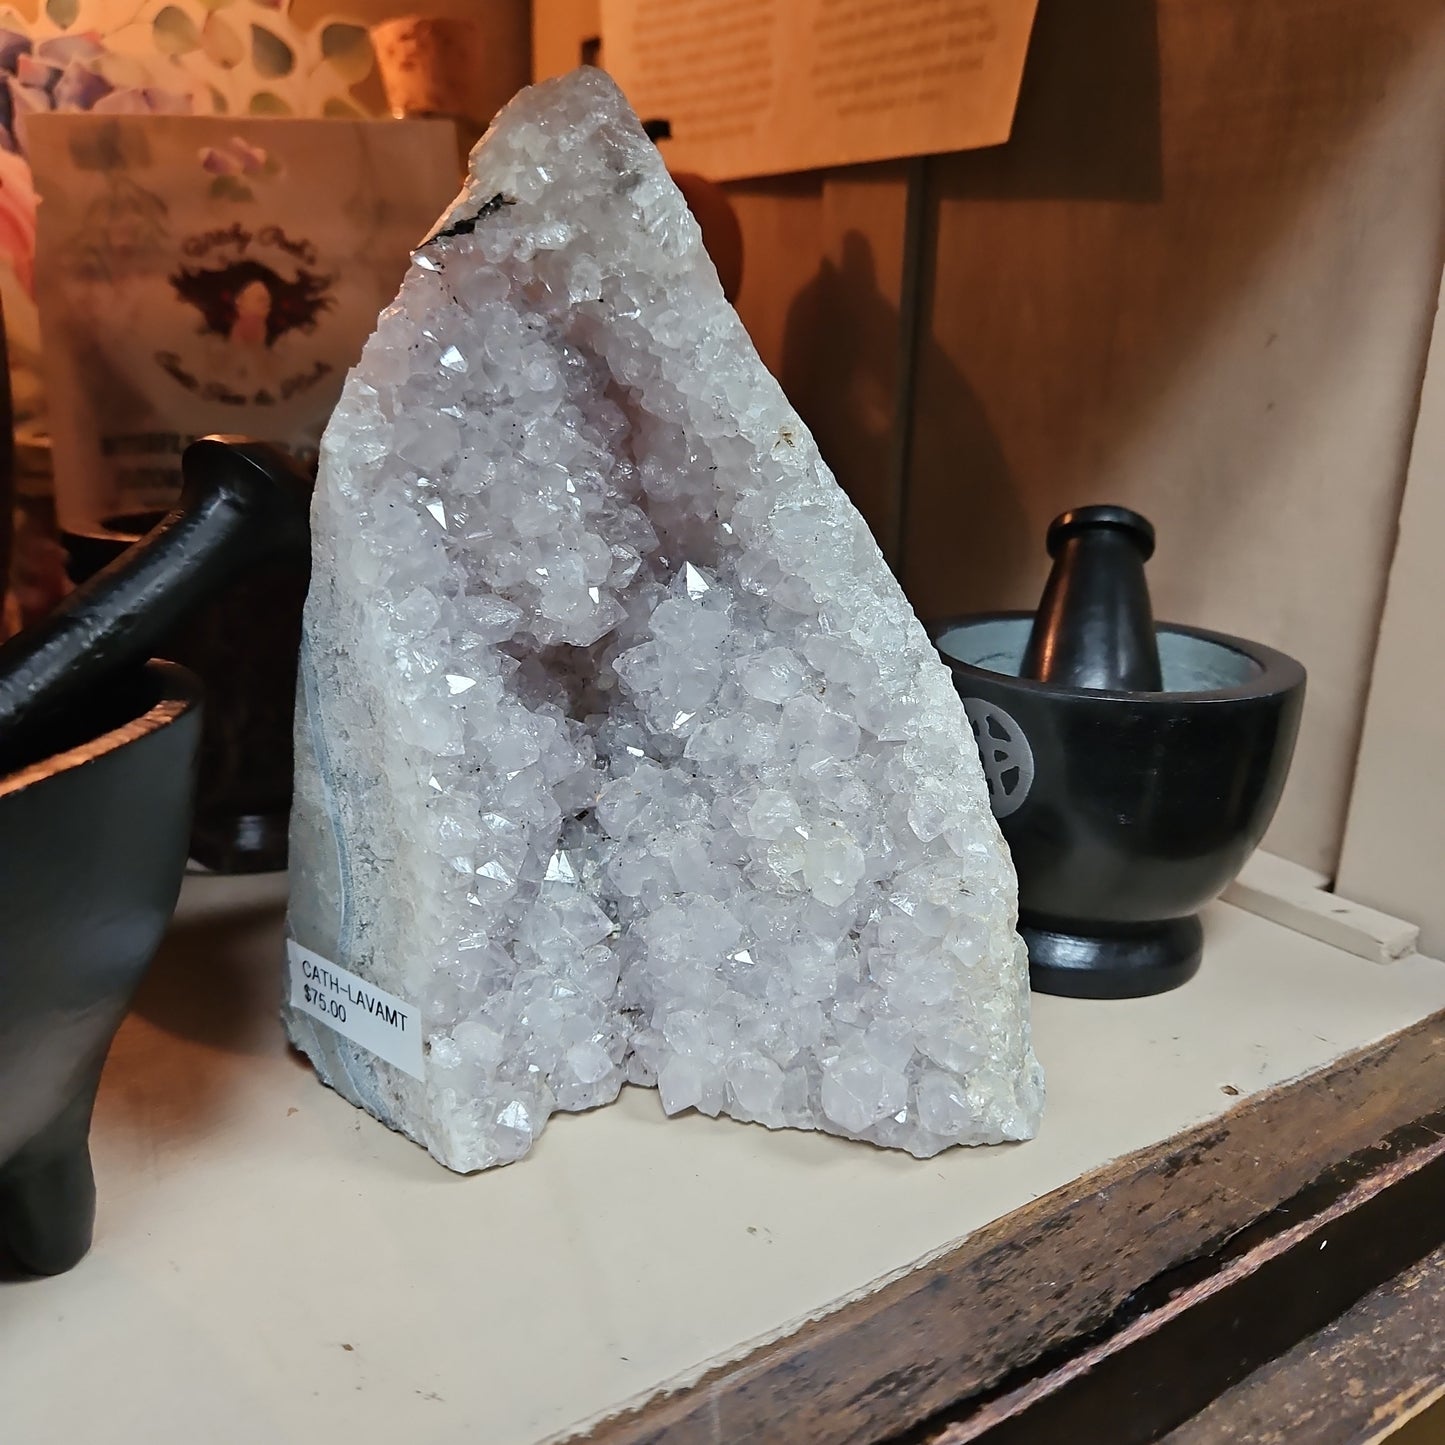 Lavender Amethyst CathedrCathedral 9 1/4 inches tall